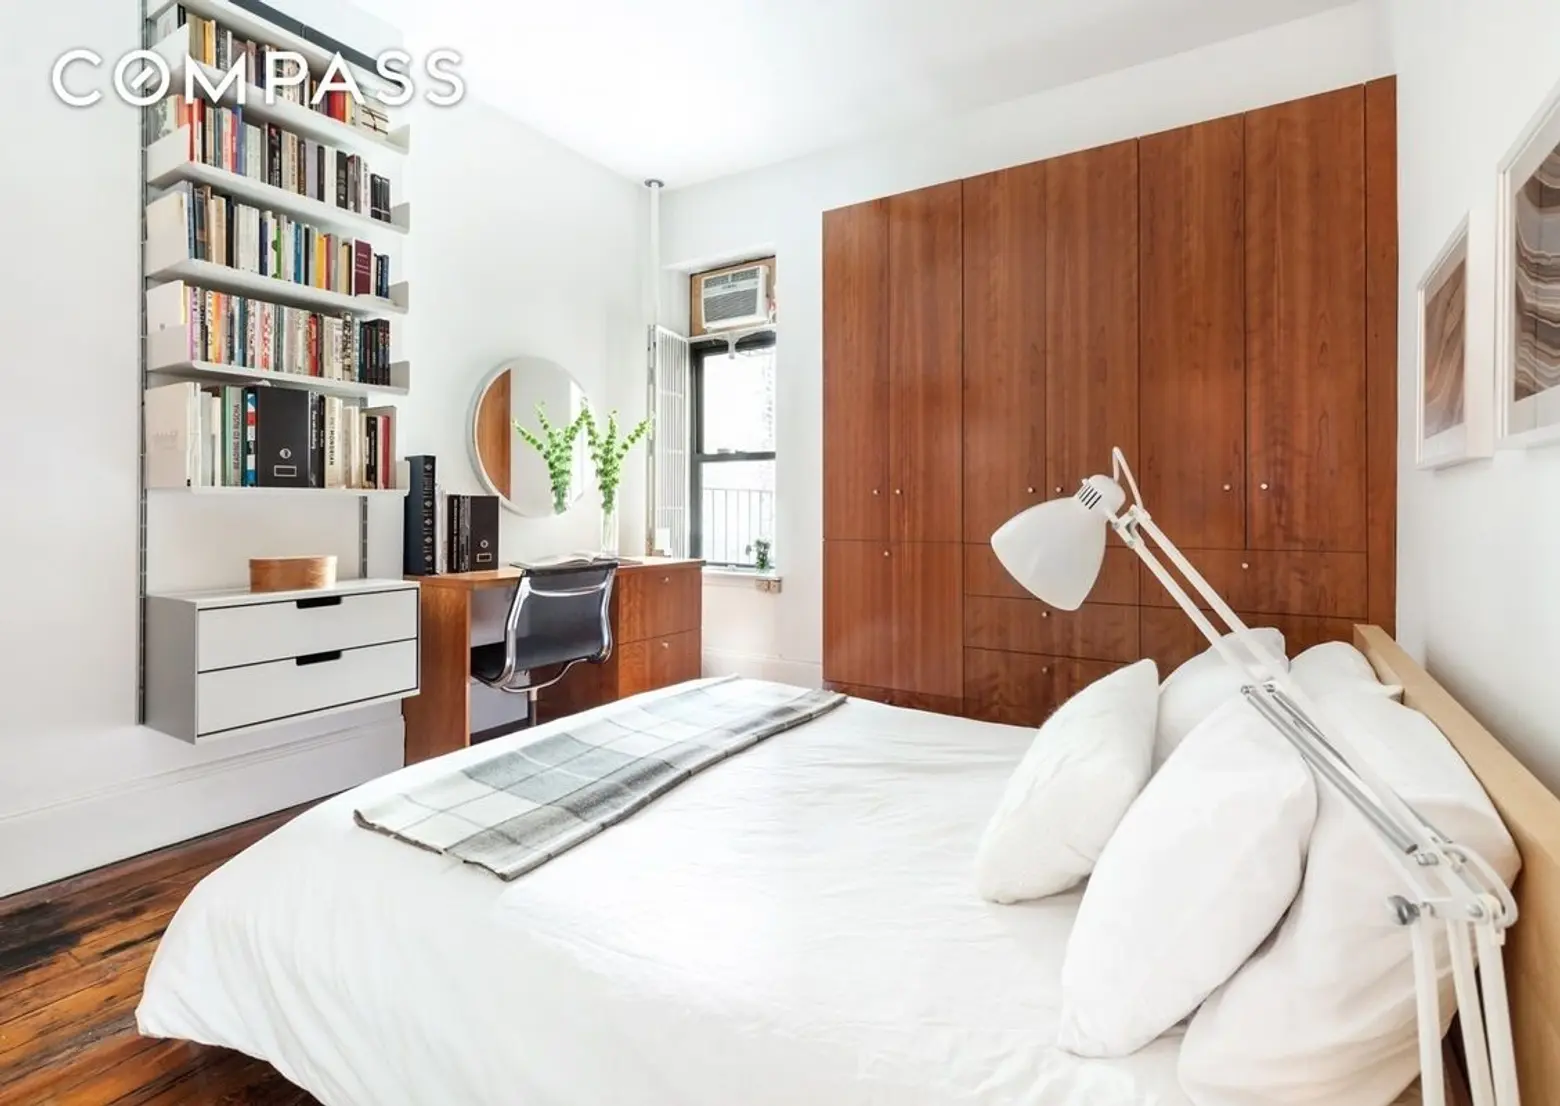 66 4th place, carroll gardens, compass, bedroom 